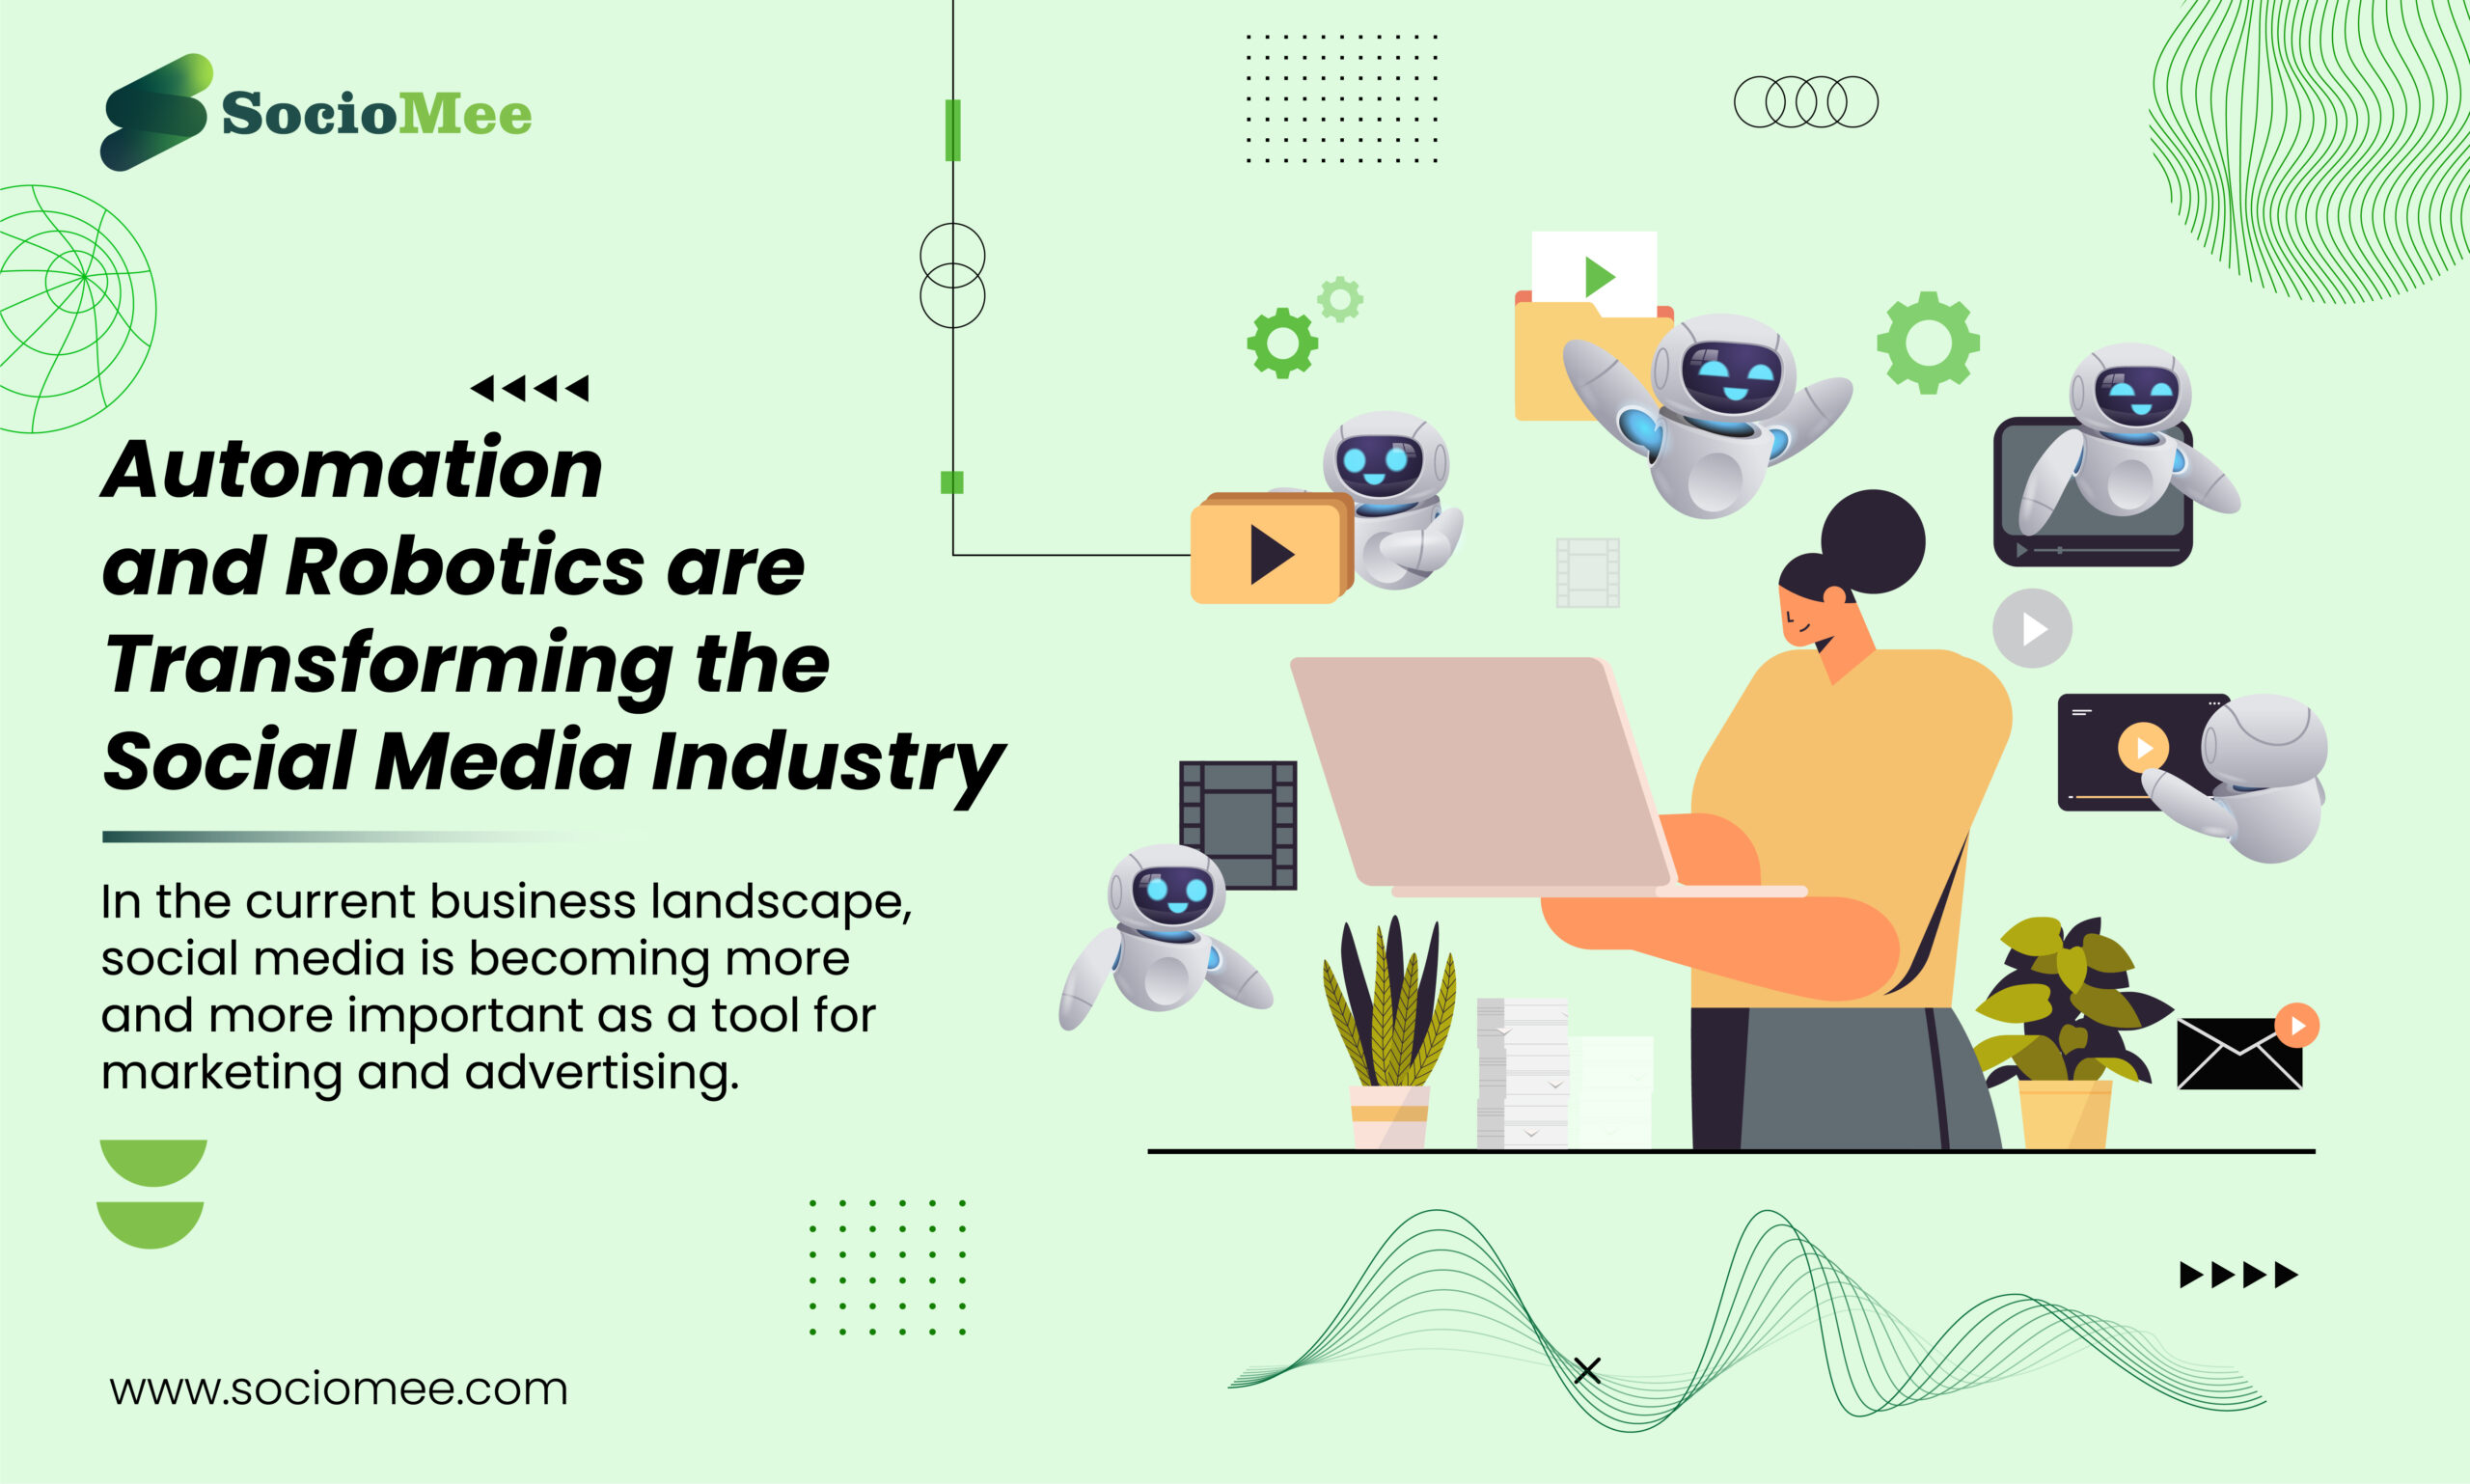 How Automation and Robotics are Transforming the Social Media Industry